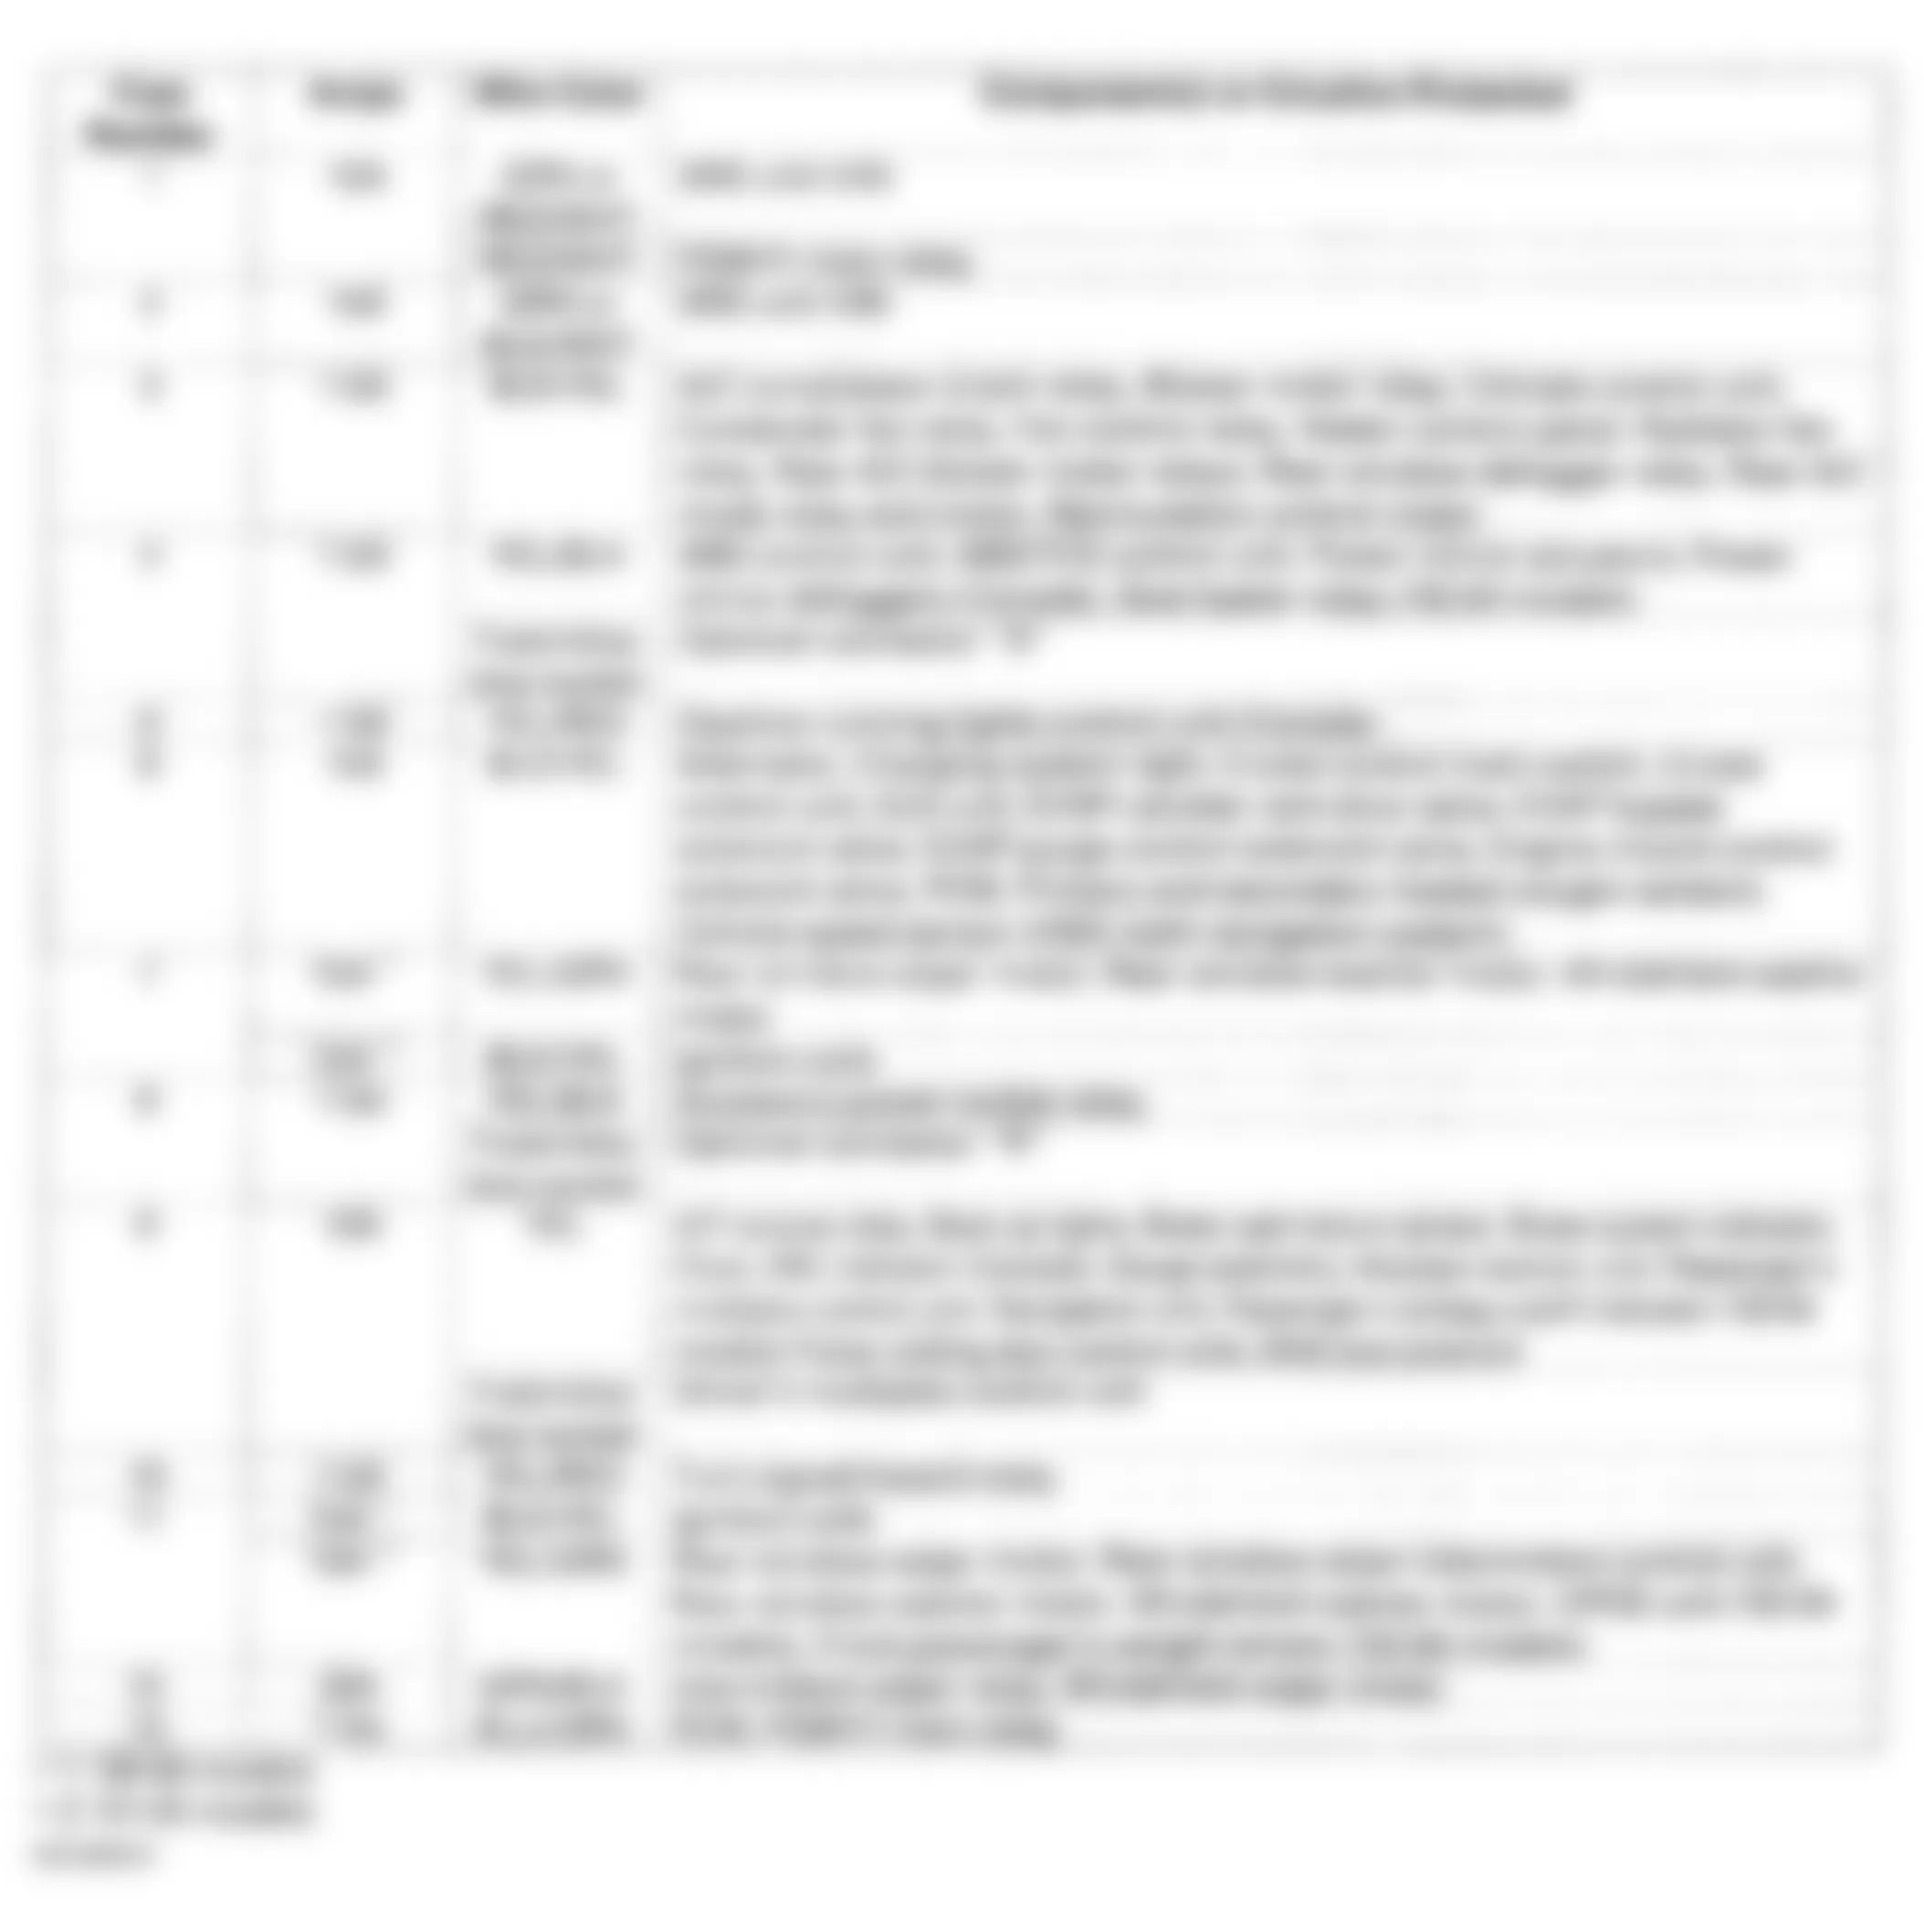 Honda Odyssey EX 2002 - Component Locations -  Drivers Under-Dash Fuse/Relay Box Identification Chart